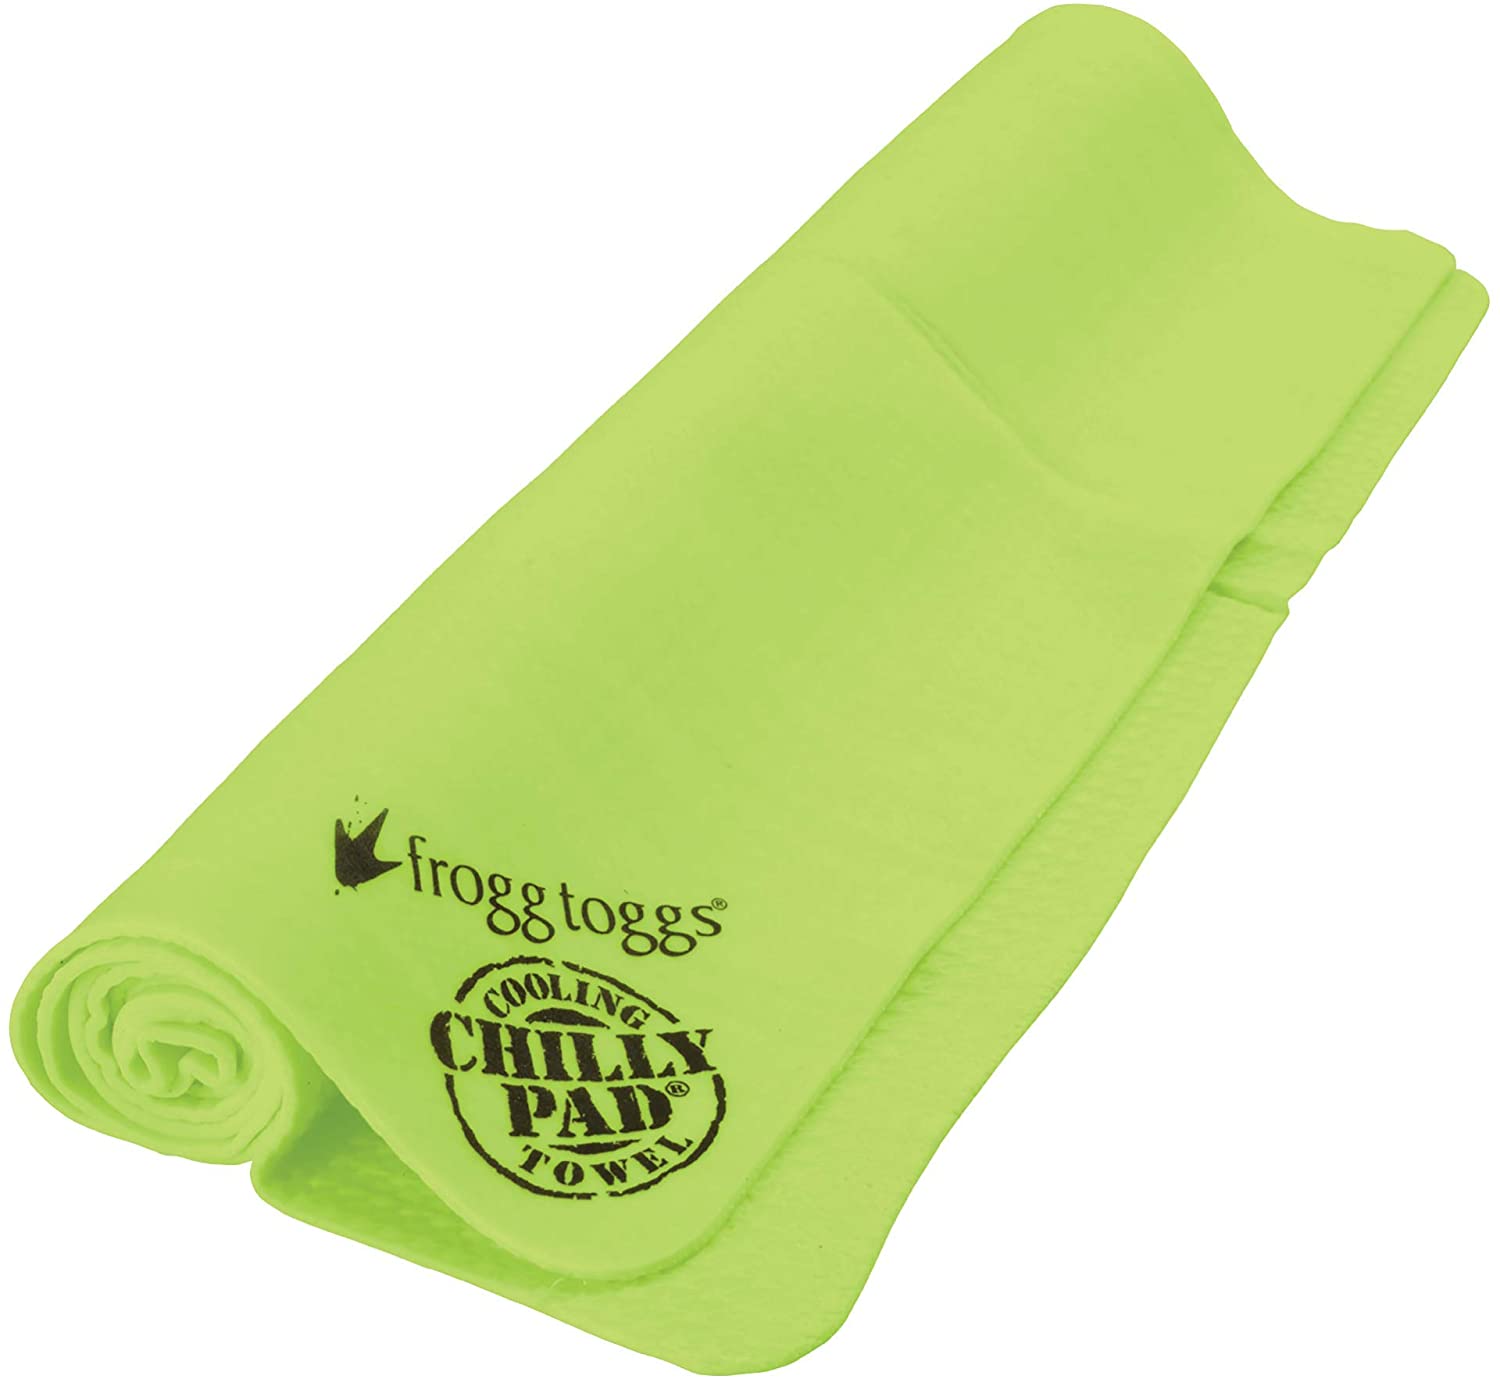 Taille 33" X 13" Frogg Toggs Chilly Pad de refroidissement serviette 